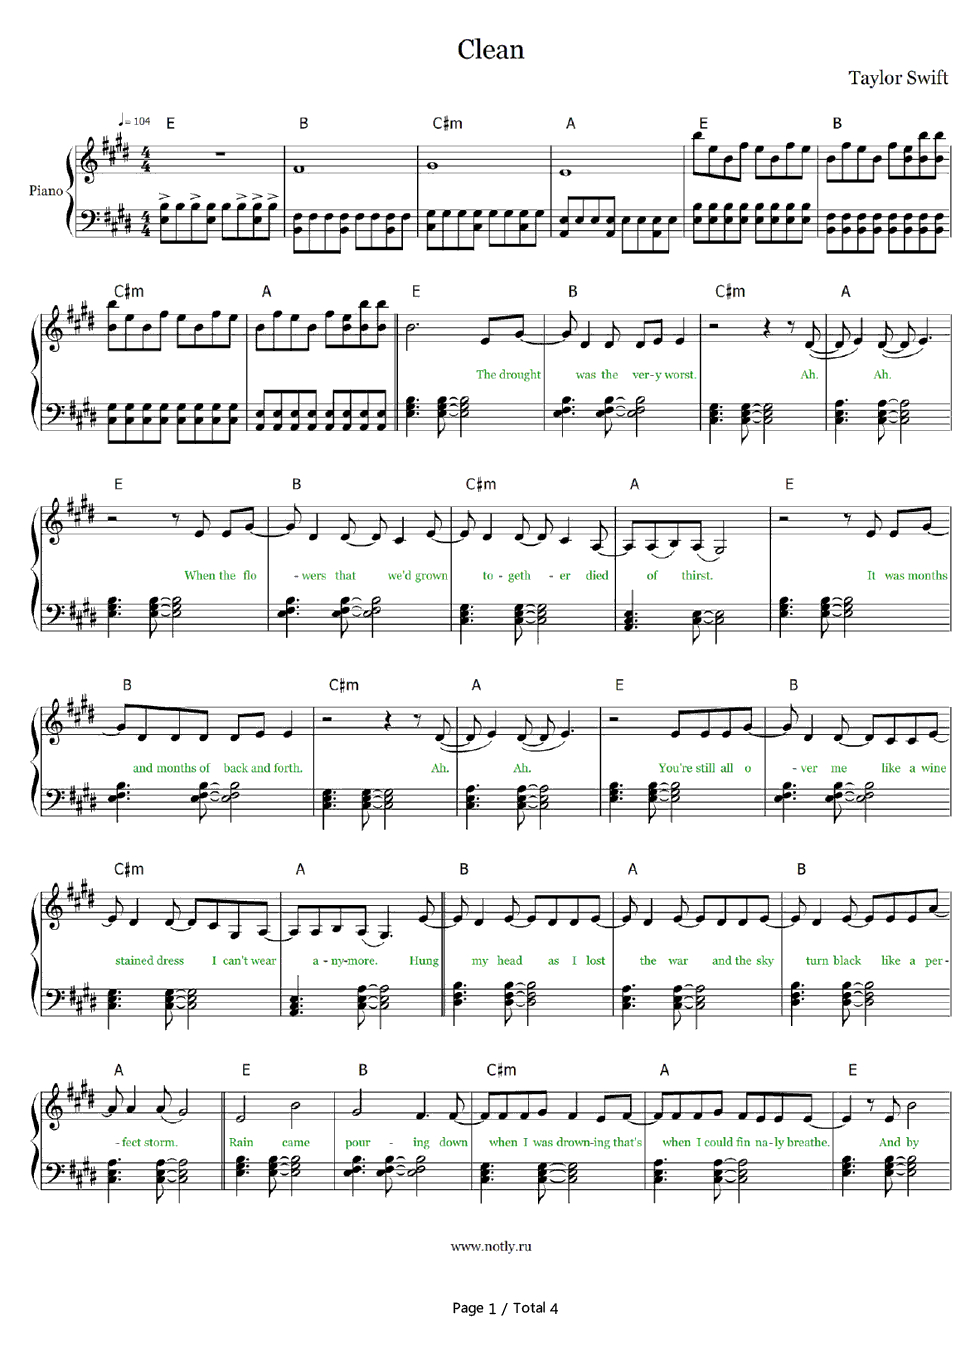 Cleantaylor Swift | Piano Sheet Music And Chord Info | Pinterest - Taylor Swift Mine Piano Sheet Music Free Printable